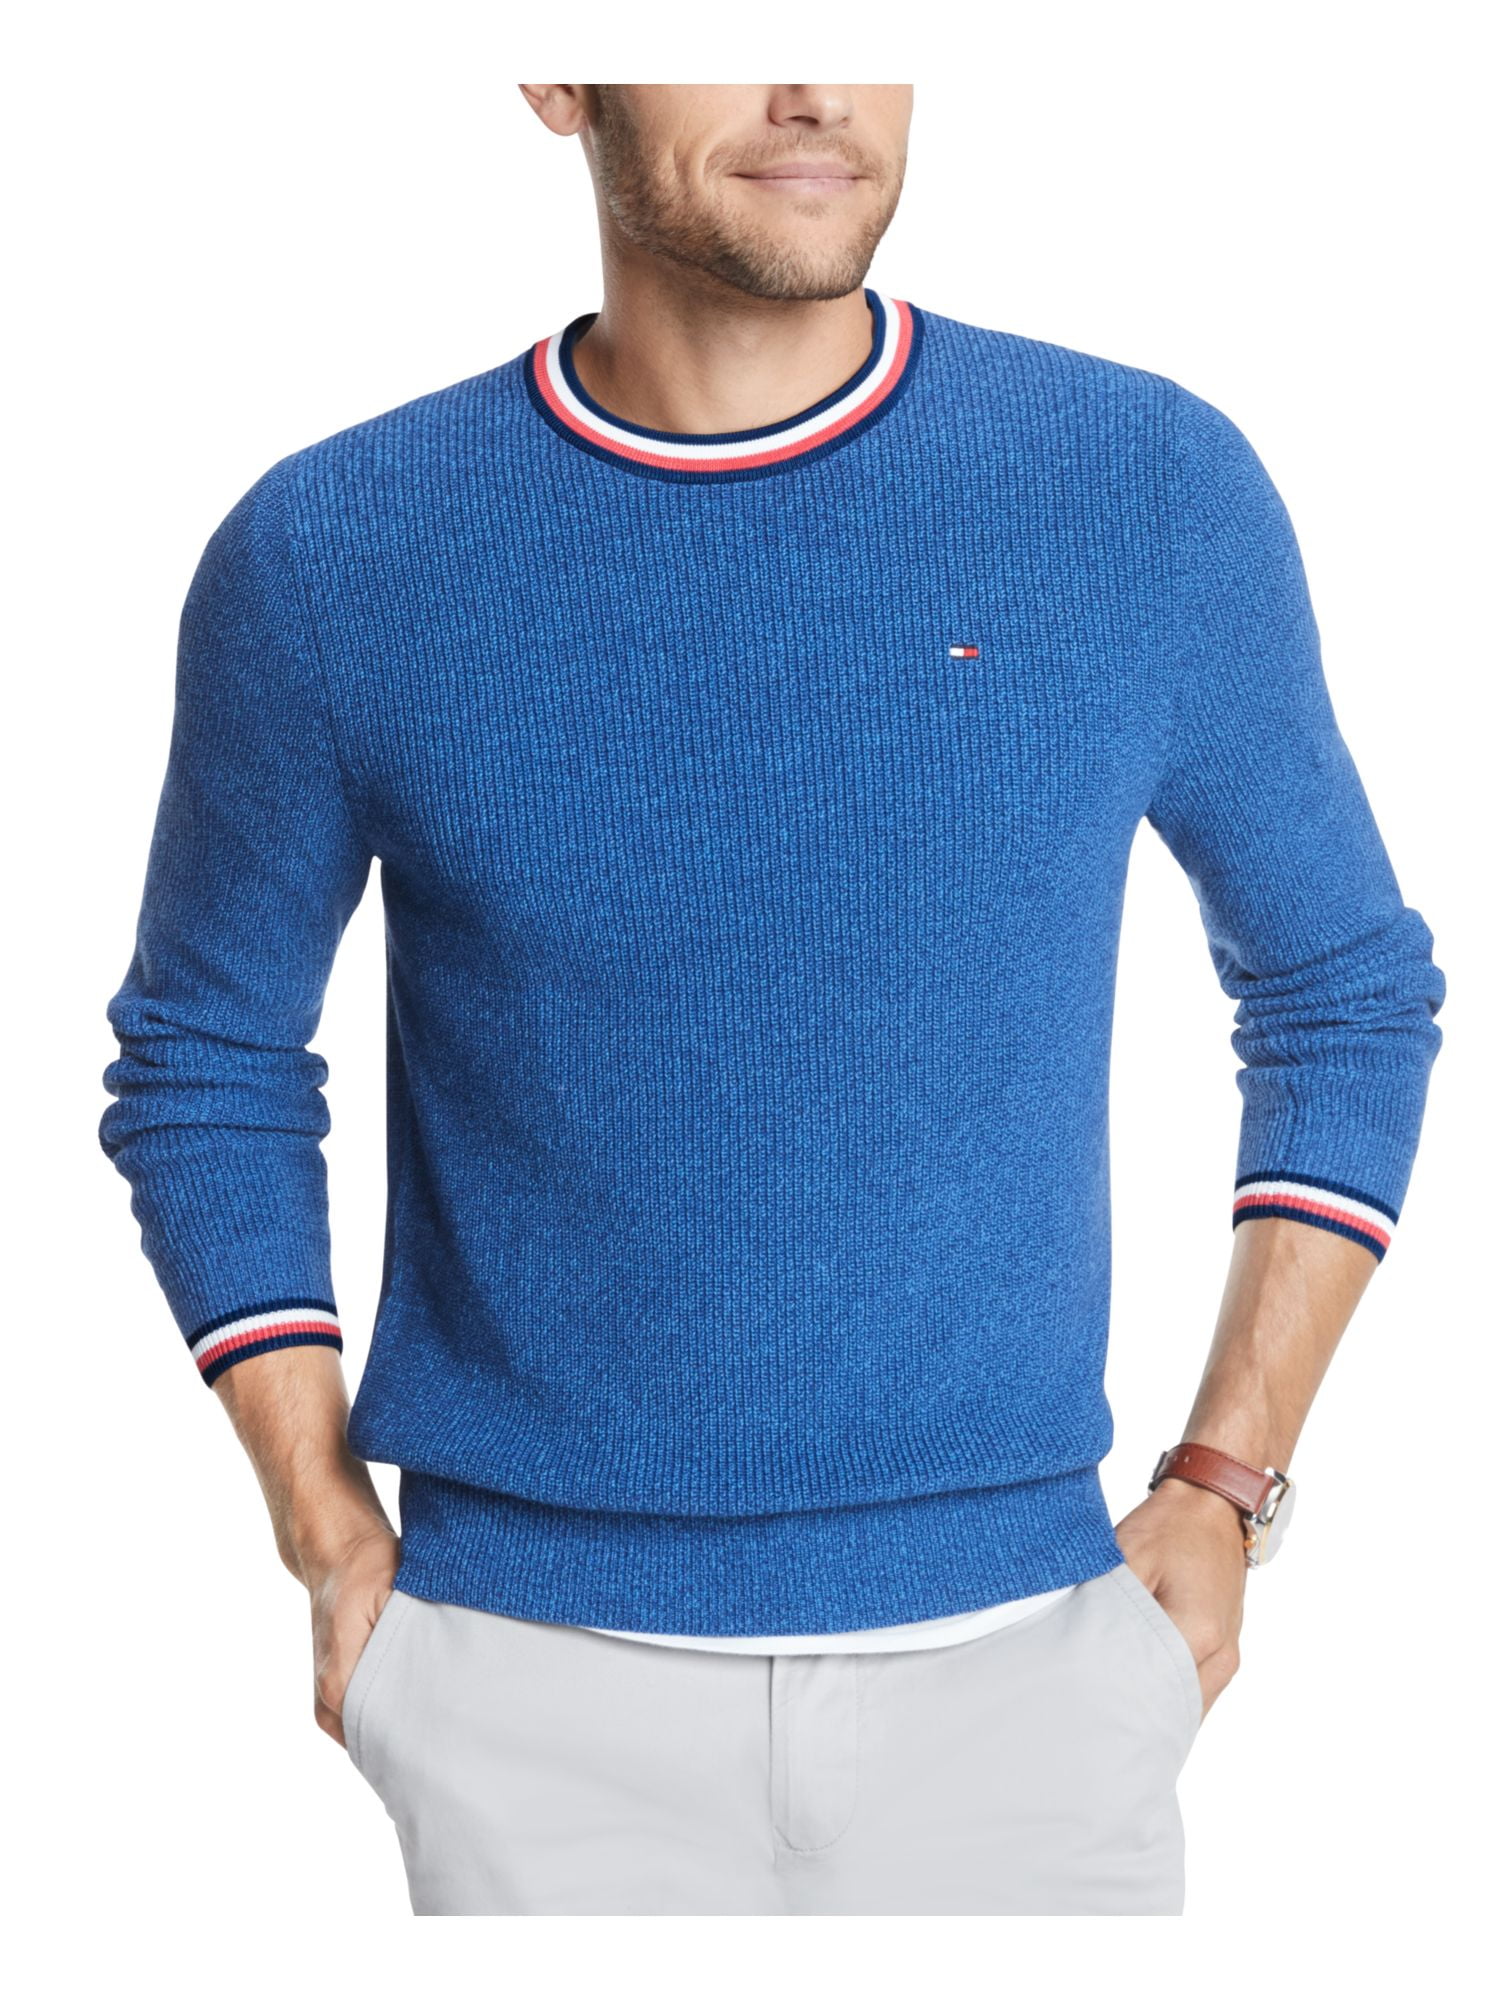 Sweater Long Mens Knit Sleeve XXL Blue Crew Neck Fit Pullover TOMMY Classic HILFIGER